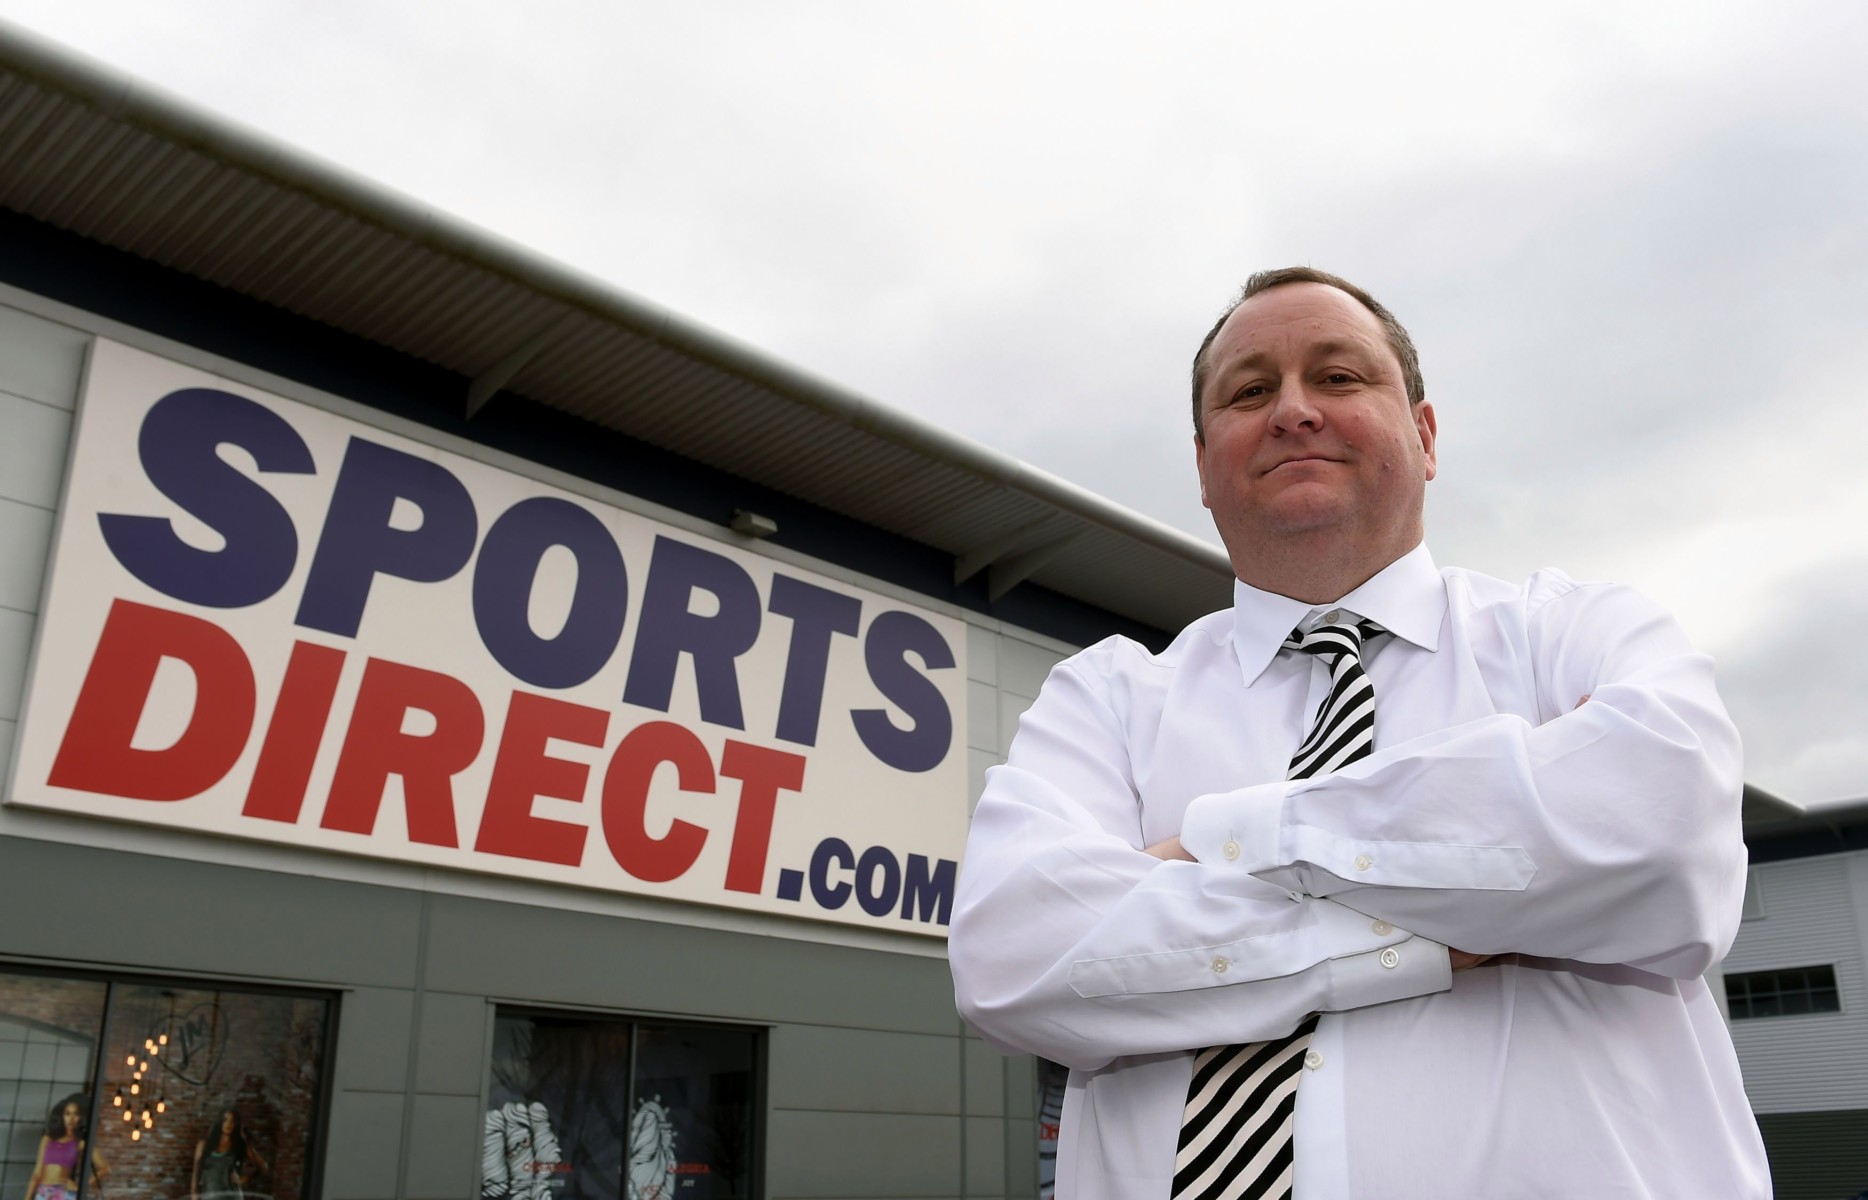 Ashley has just laid off non-playing staff at Newcastle